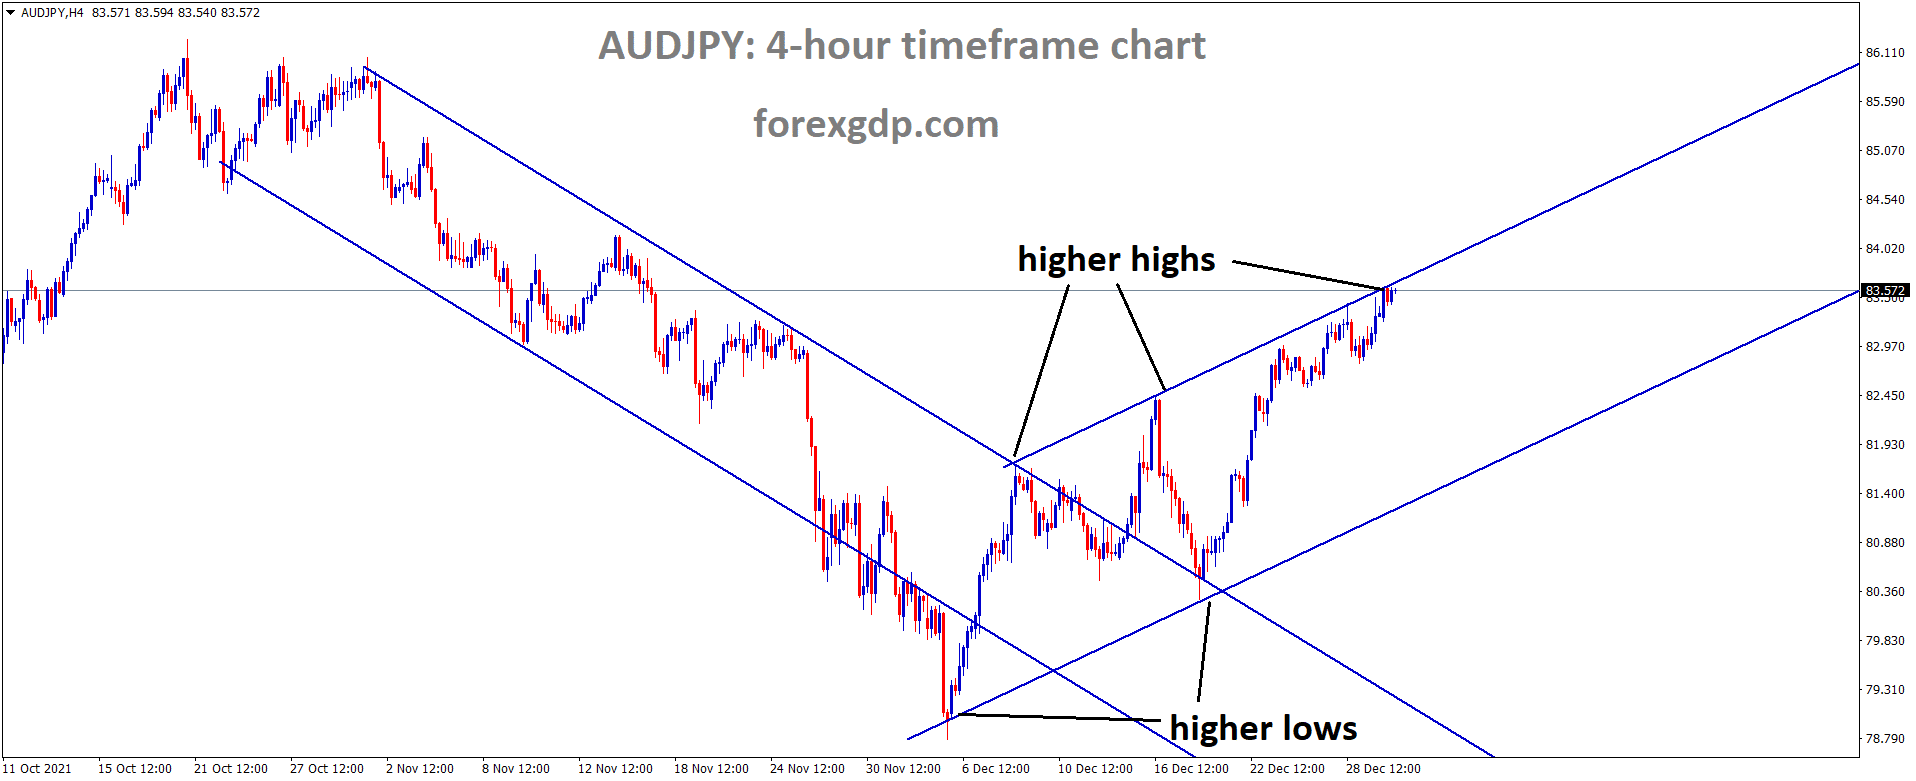 AUDJPY is moving in an Ascending channel and the market has reached the higher high area of the channel.